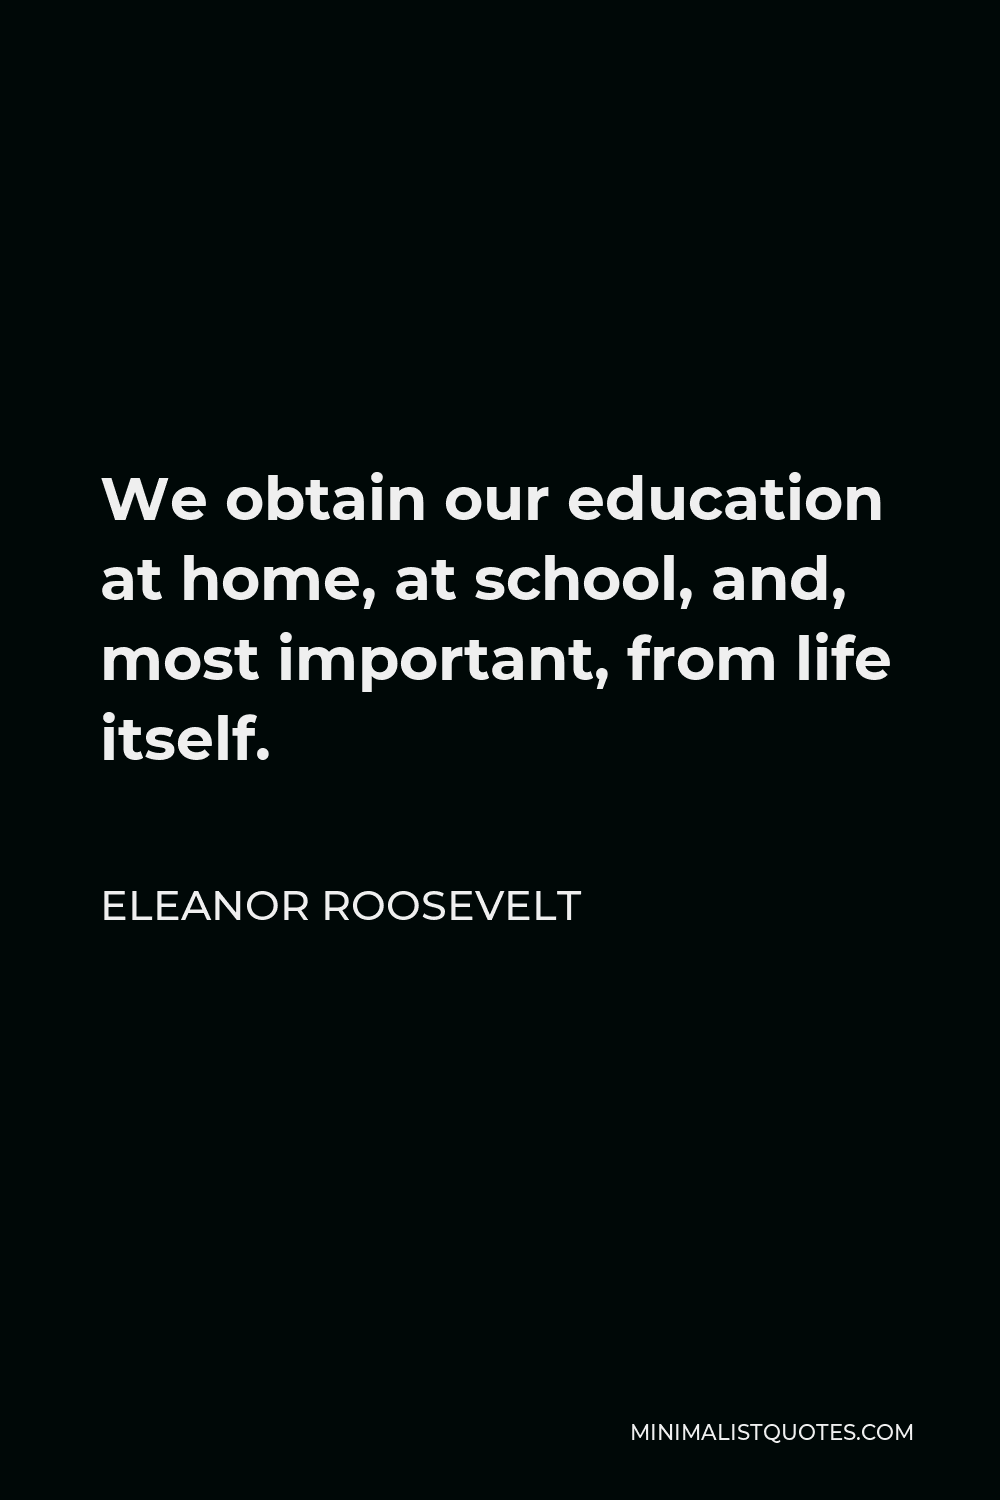 Eleanor Roosevelt Quote - We obtain our education at home, at school, and, most important, from life itself.